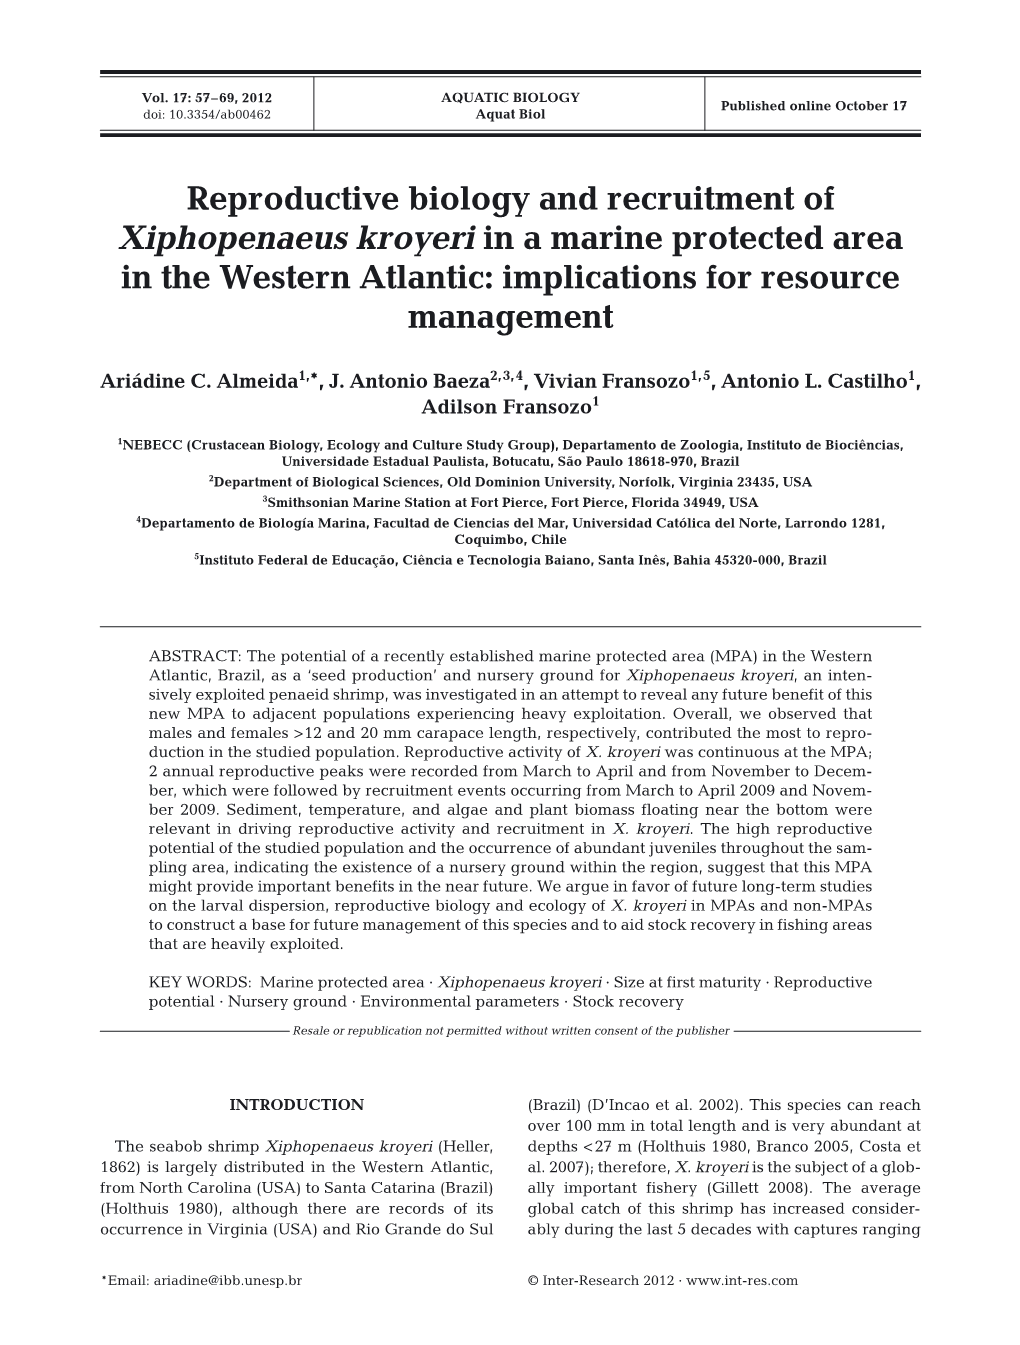 Reproductive Biology and Recruitment of Xiphopenaeus Kroyeri in a Marine Protected Area in the Western Atlantic: Implications for Resource Management